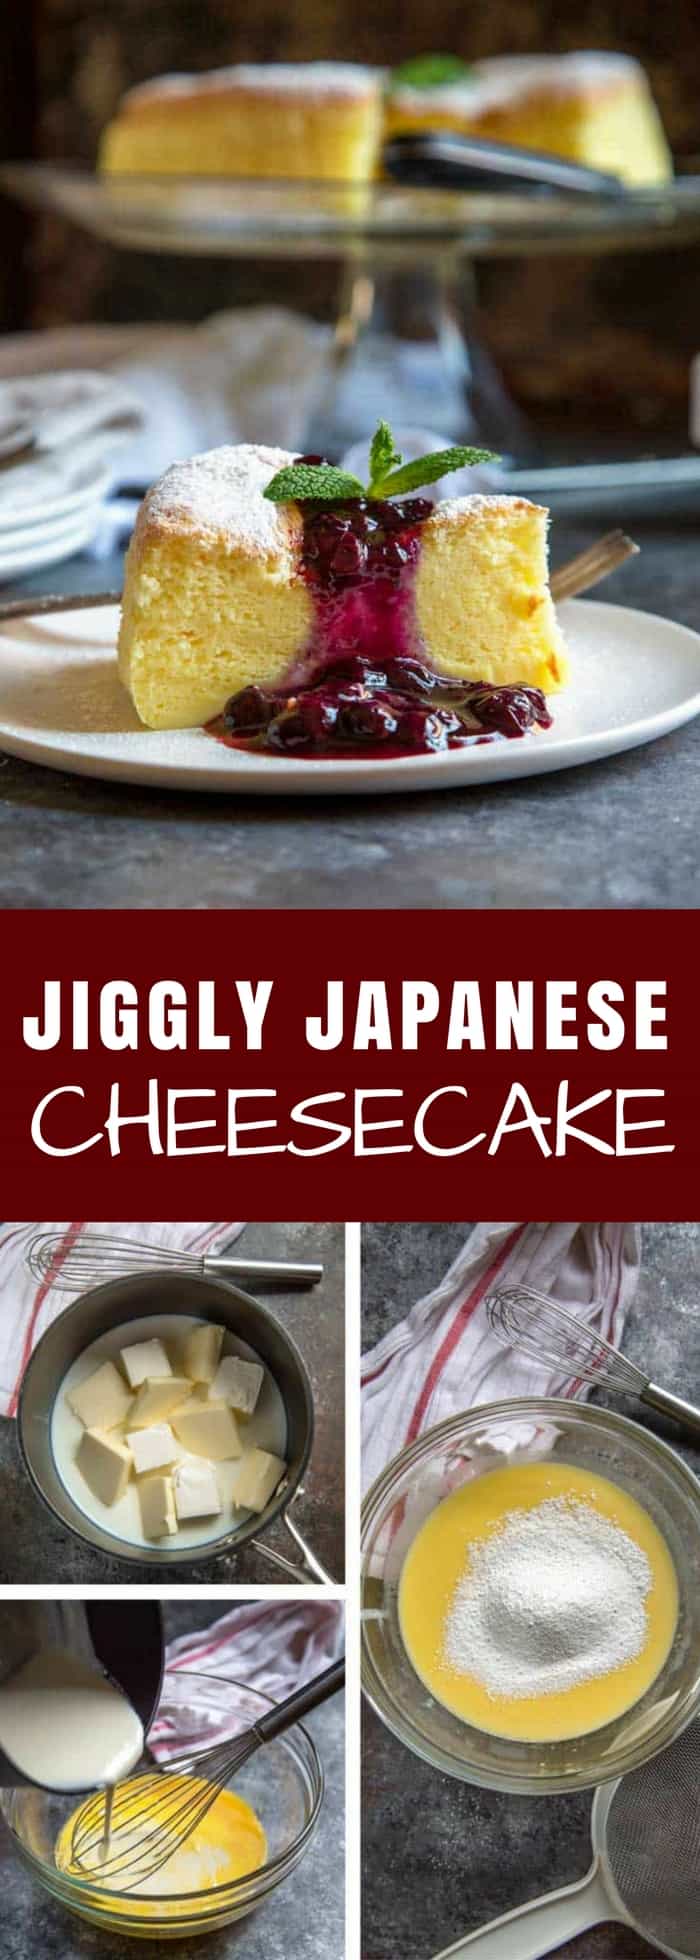 Japanese Cheesecake is made using a cream cheese, egg yolk batter that gets folded into sweet meringue. The result is an almost soufflé like sponge cake that jiggles and is amazingly fluffy. Sprinkled with powdered sugar alone or topped with berries, it's sure to please.